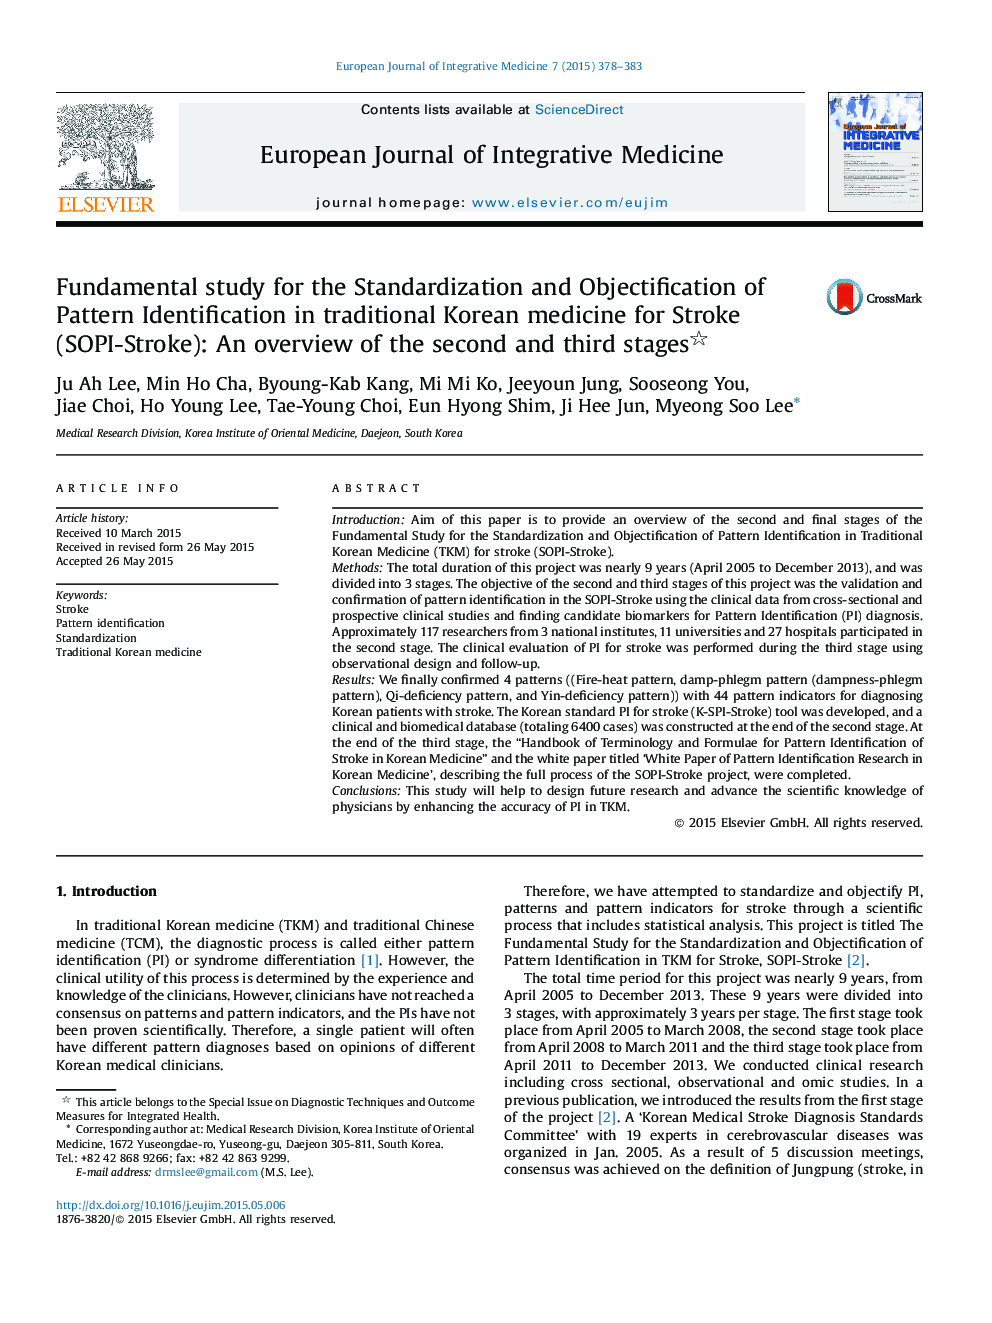 Fundamental study for the Standardization and Objectification of Pattern Identification in traditional Korean medicine for Stroke (SOPI-Stroke): An overview of the second and third stages 